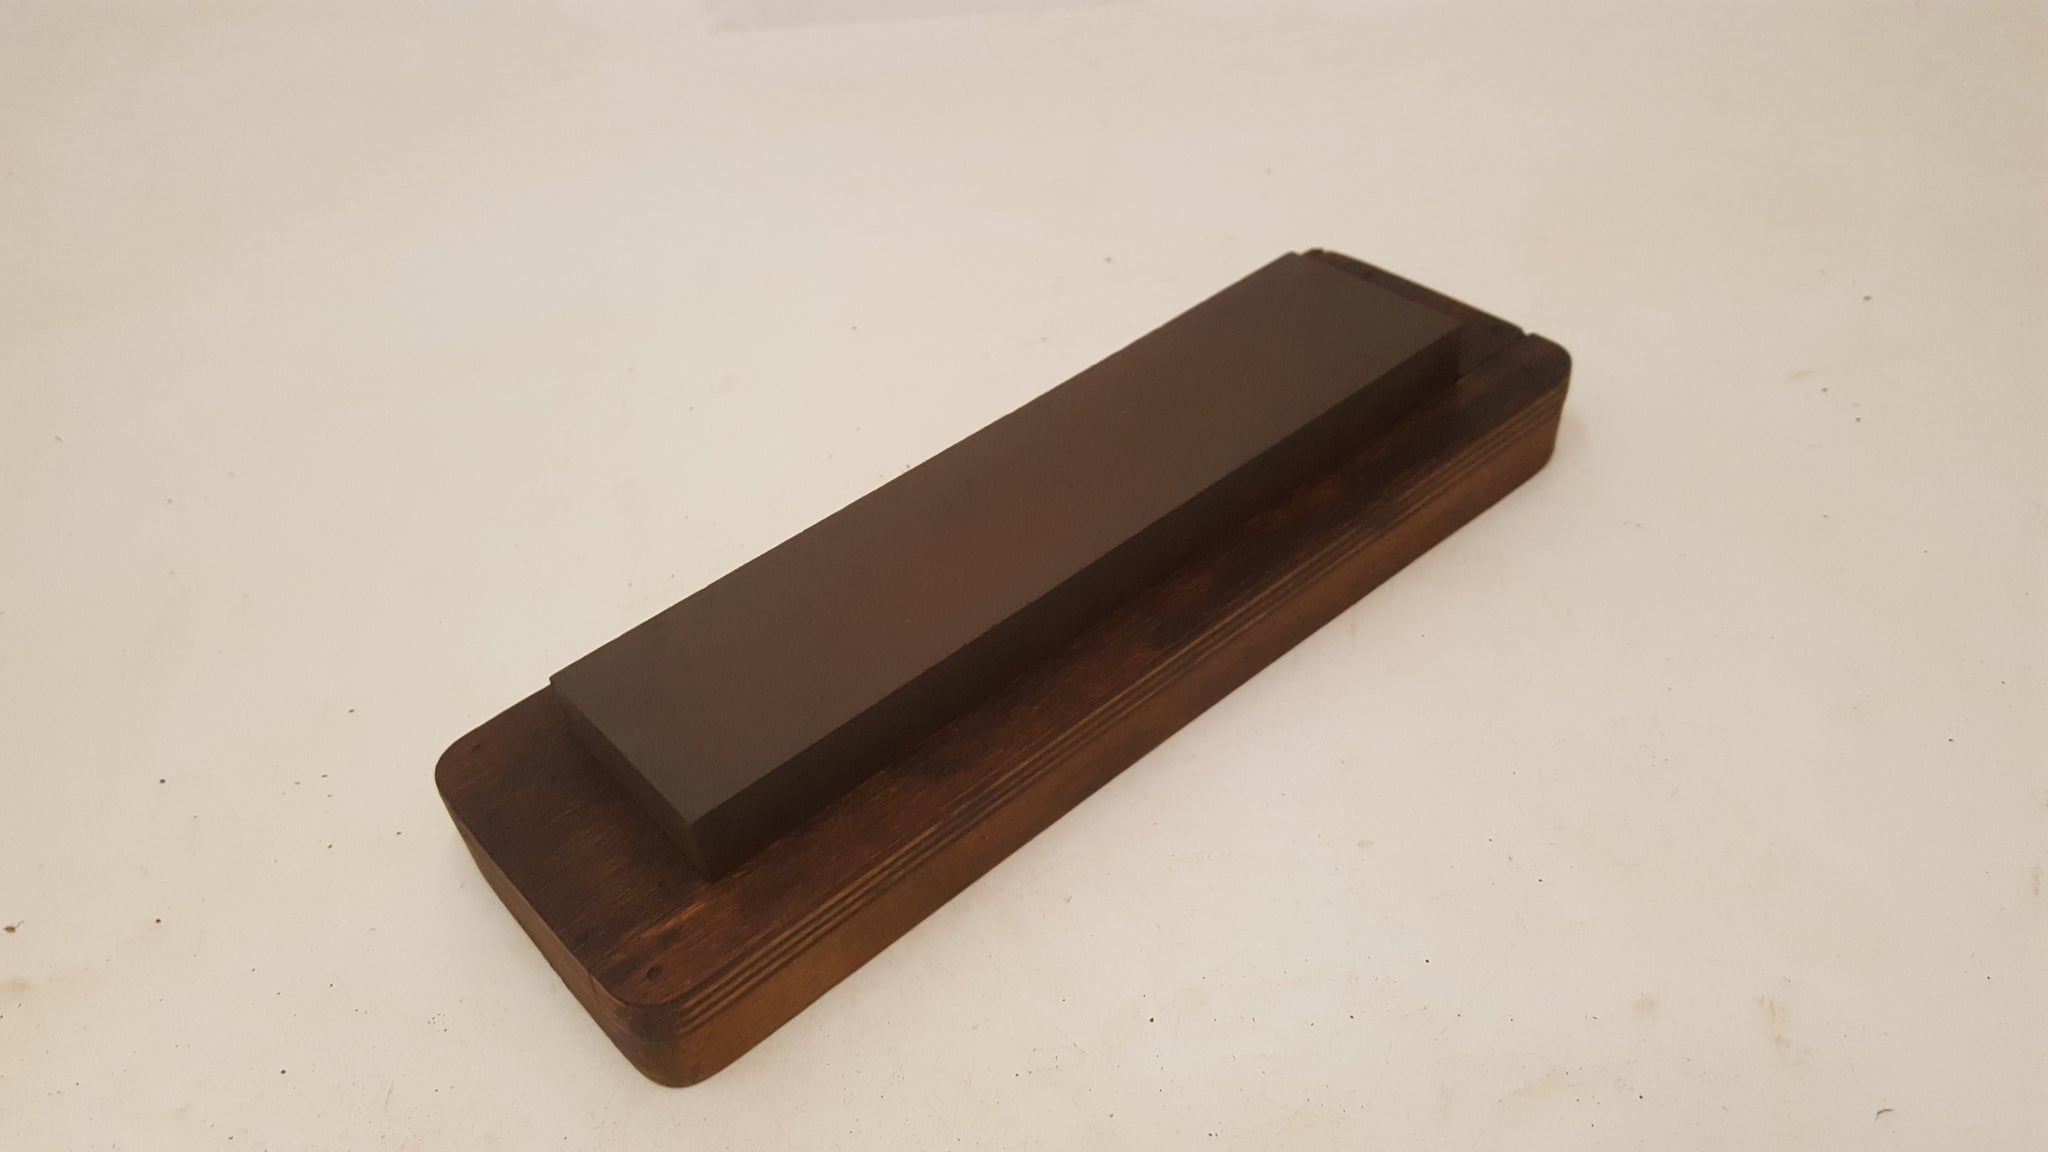 8" x 2" x 1" Combination Sharpening Stone in Wooden Box 36433